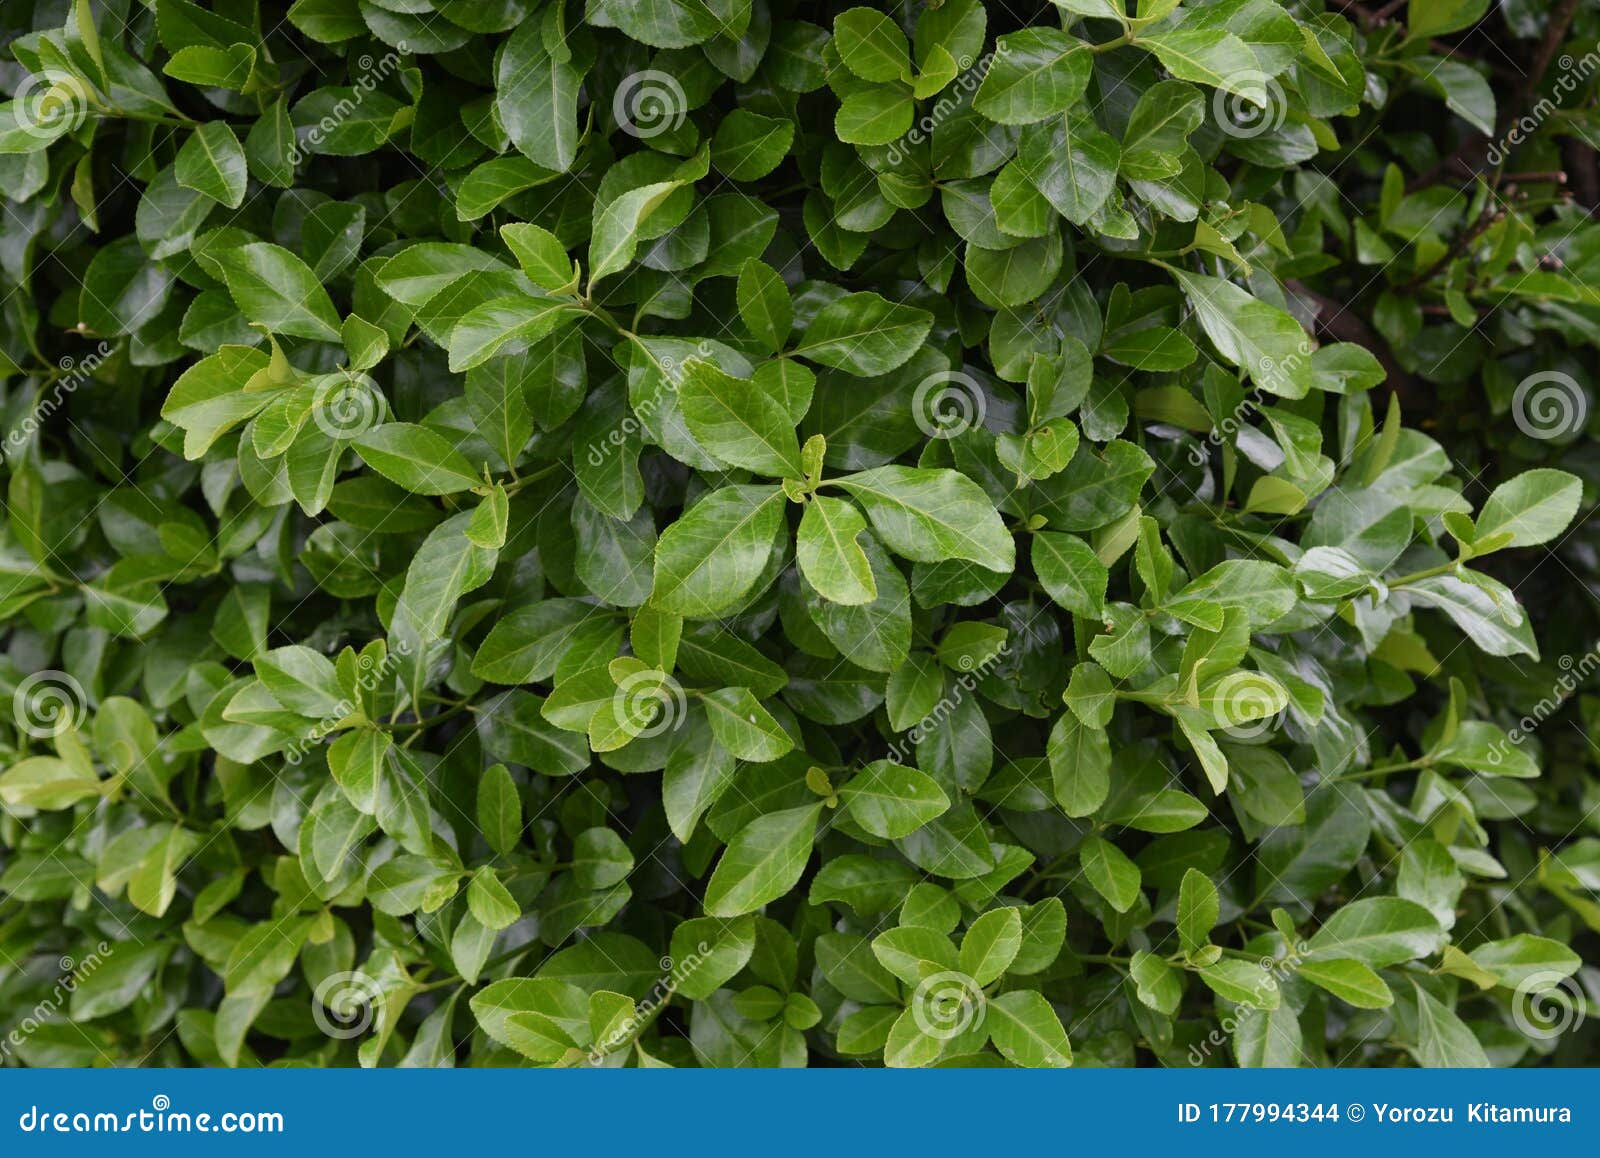 1 Euonymus Japanese Spindle Tree Photos Free Royalty Free Stock Photos From Dreamstime